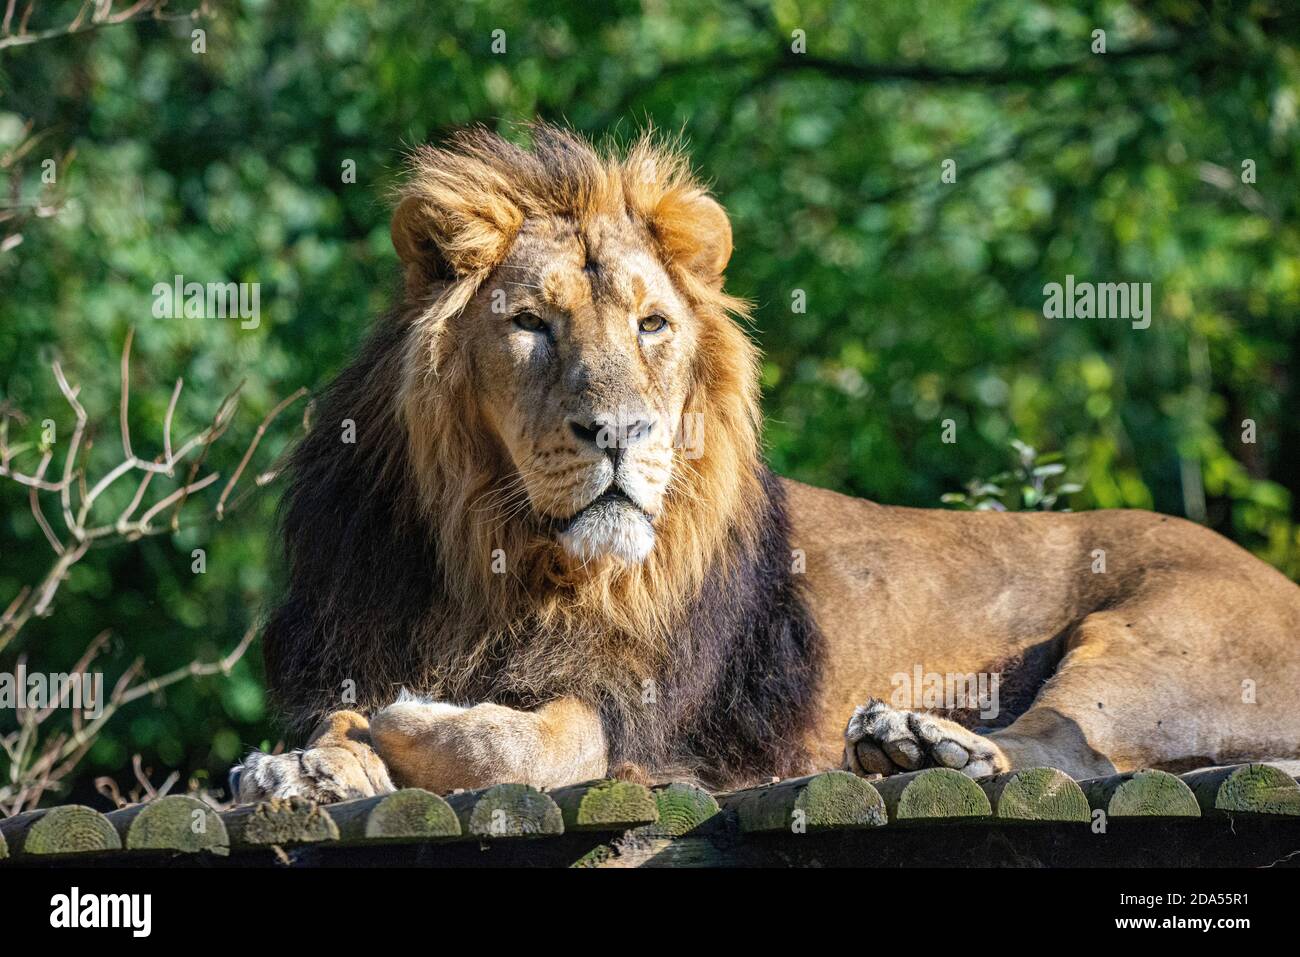 Lion leader of the pack Stock Photo